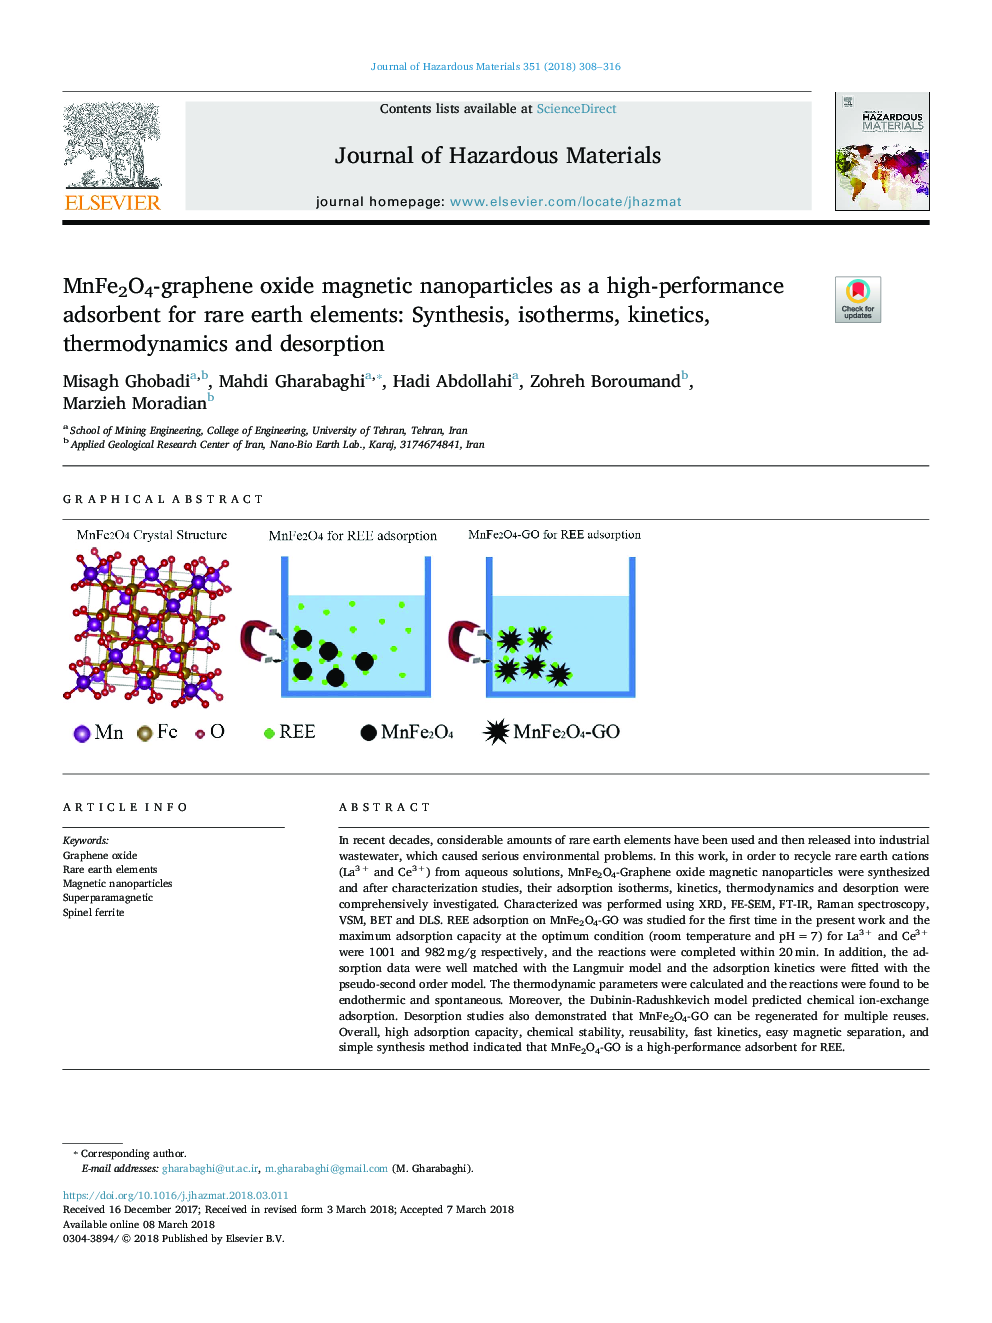 MnFe2O4-graphene oxide magnetic nanoparticles as a high-performance adsorbent for rare earth elements: Synthesis, isotherms, kinetics, thermodynamics and desorption